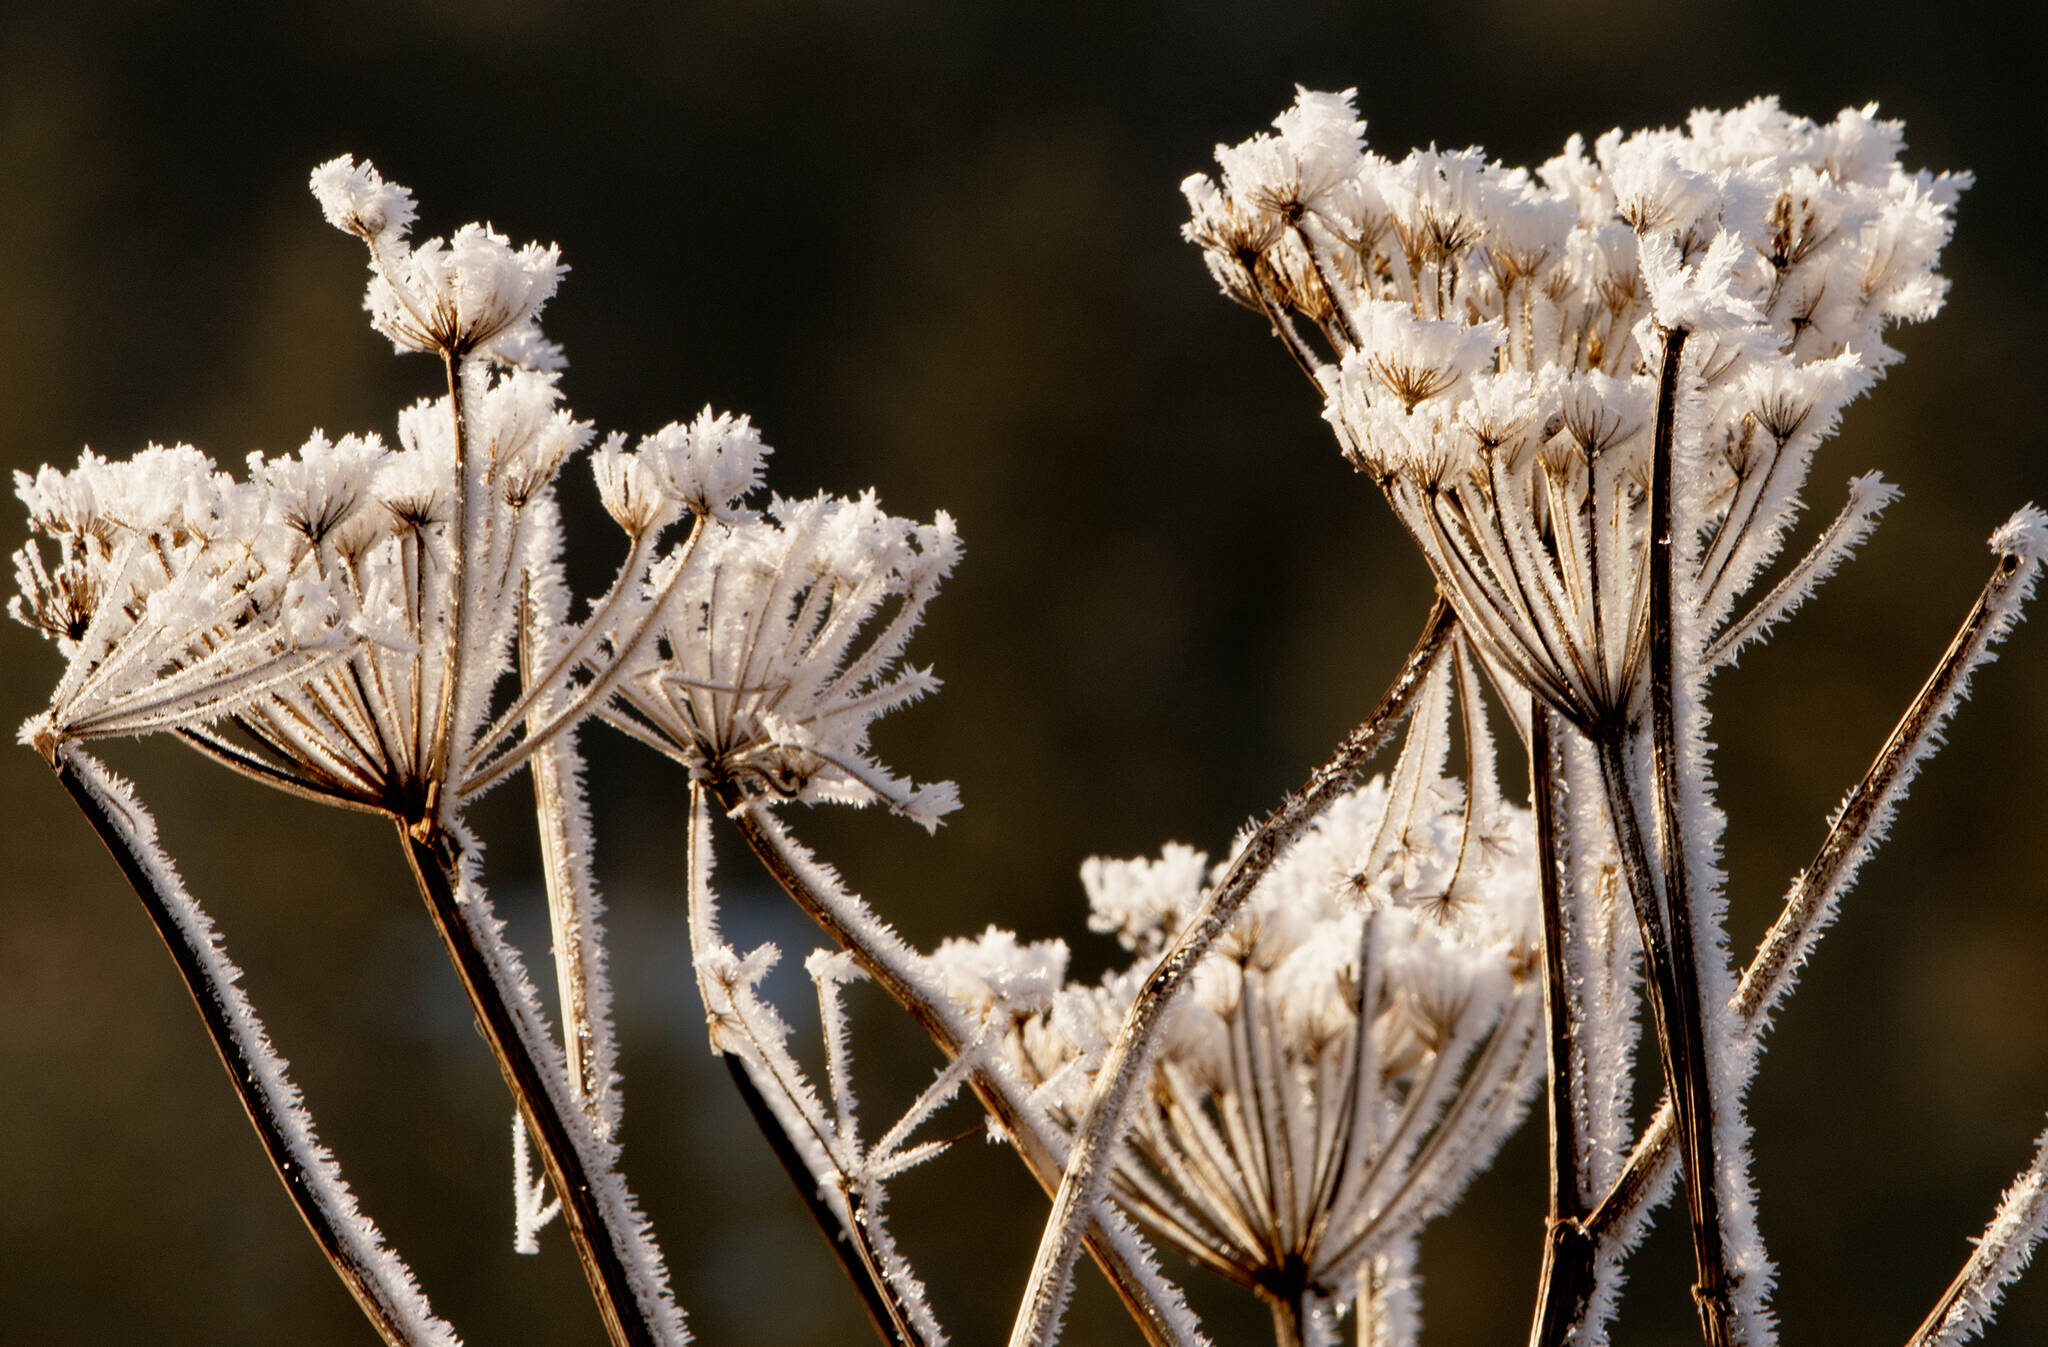 Winter frost covering stalks of Cow Parsnip, Mendenhall Wetlands Game Refuge. (Courtesy Photo / Kenneth Gill, gillfoto)